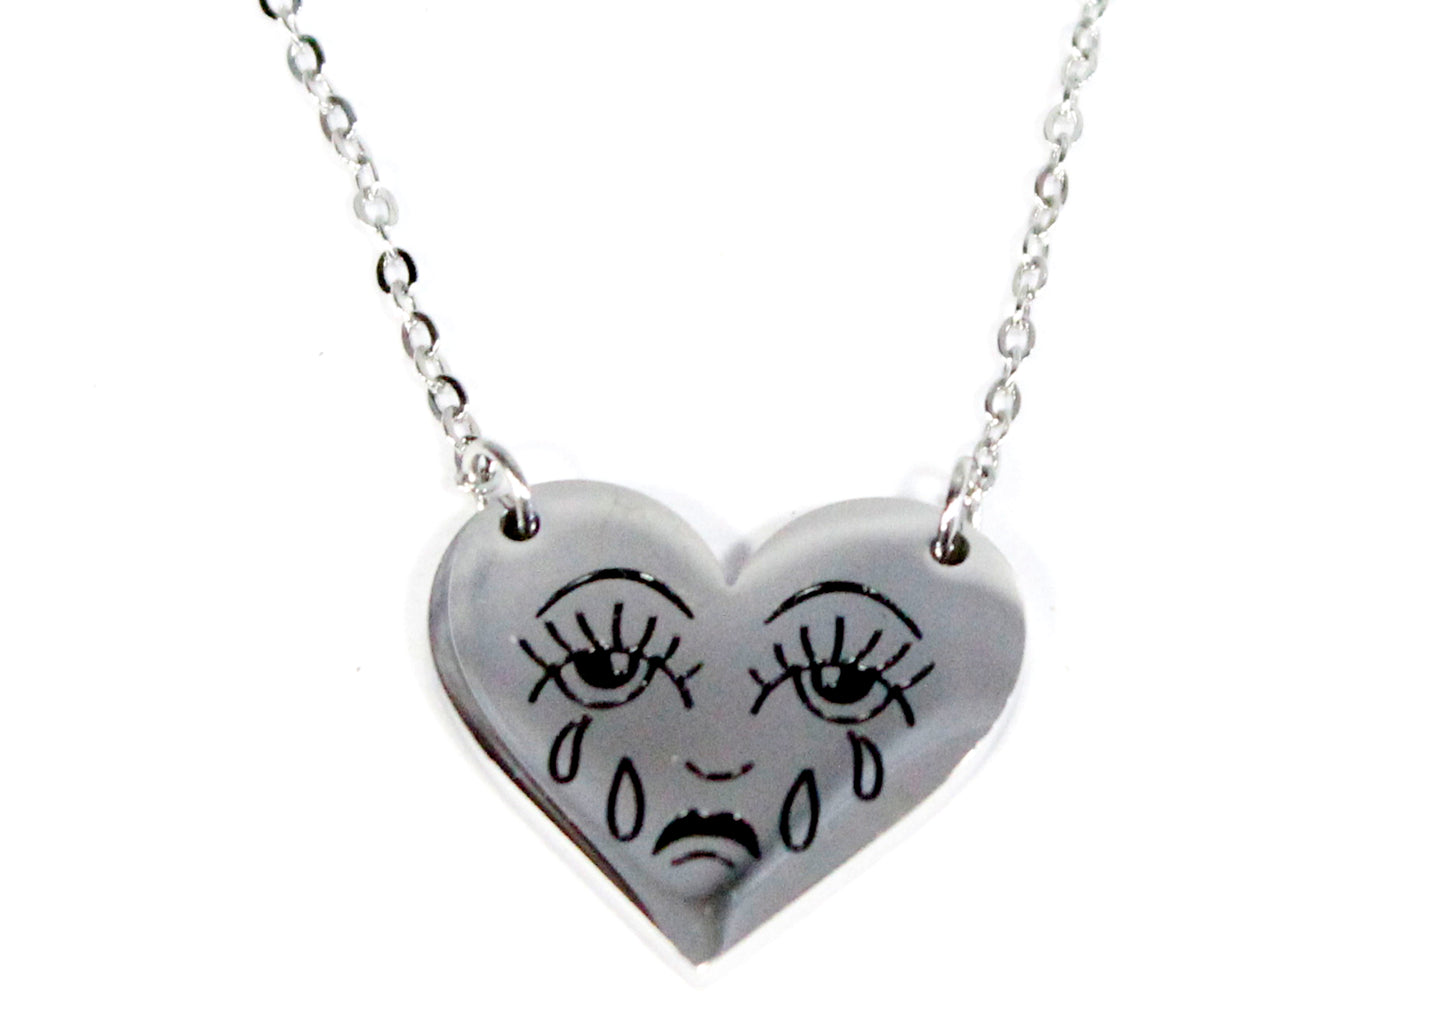 Crying Heart Necklace in Silver